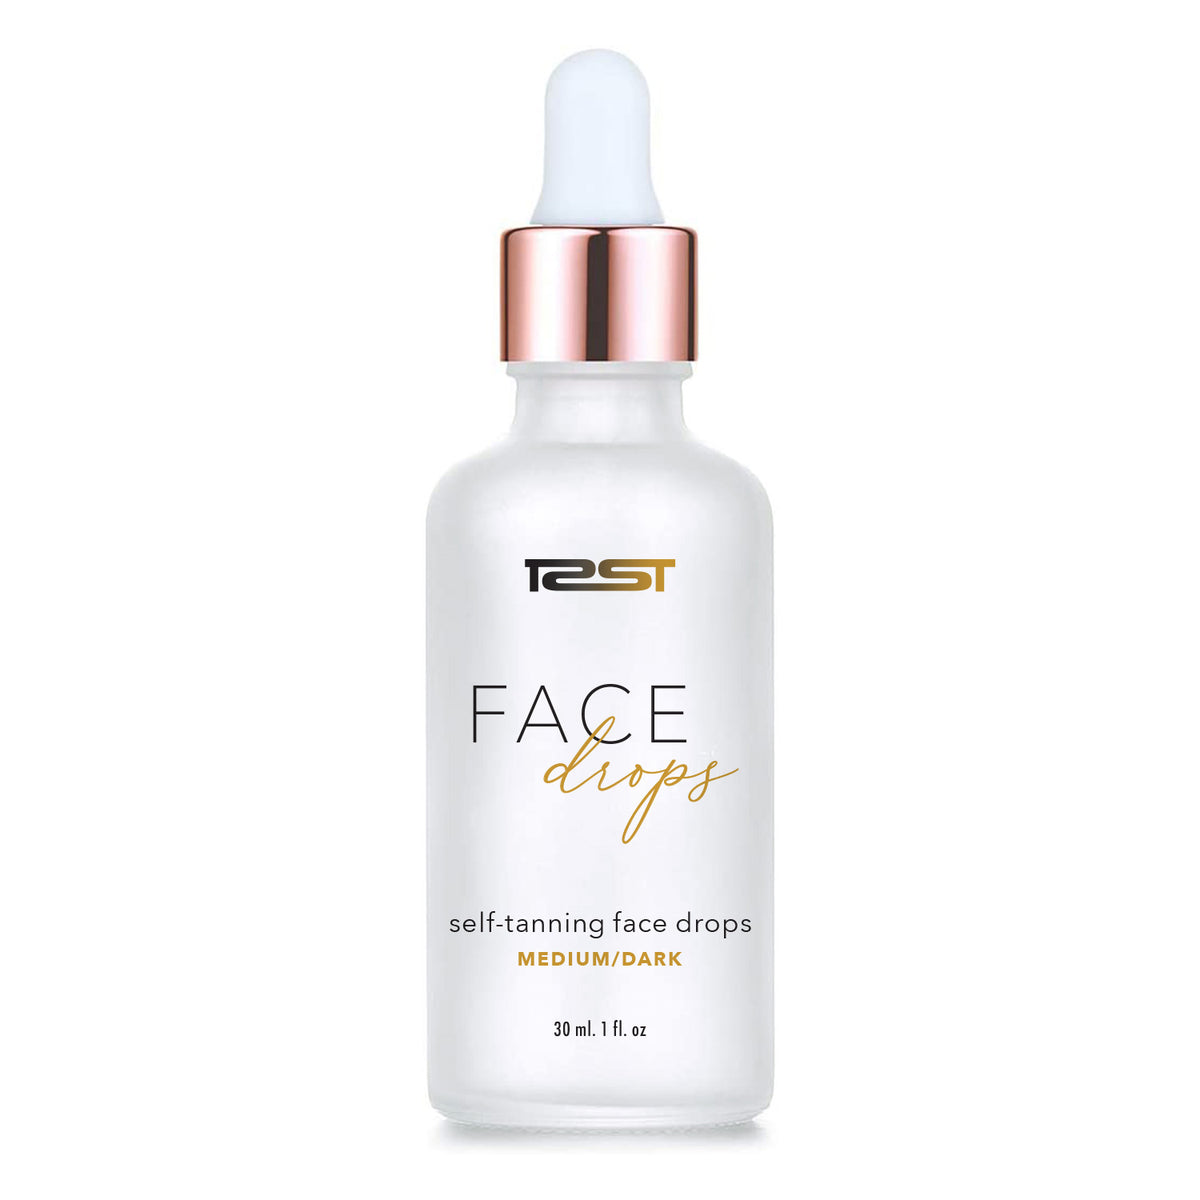 SELF TANNING FACE DROPS